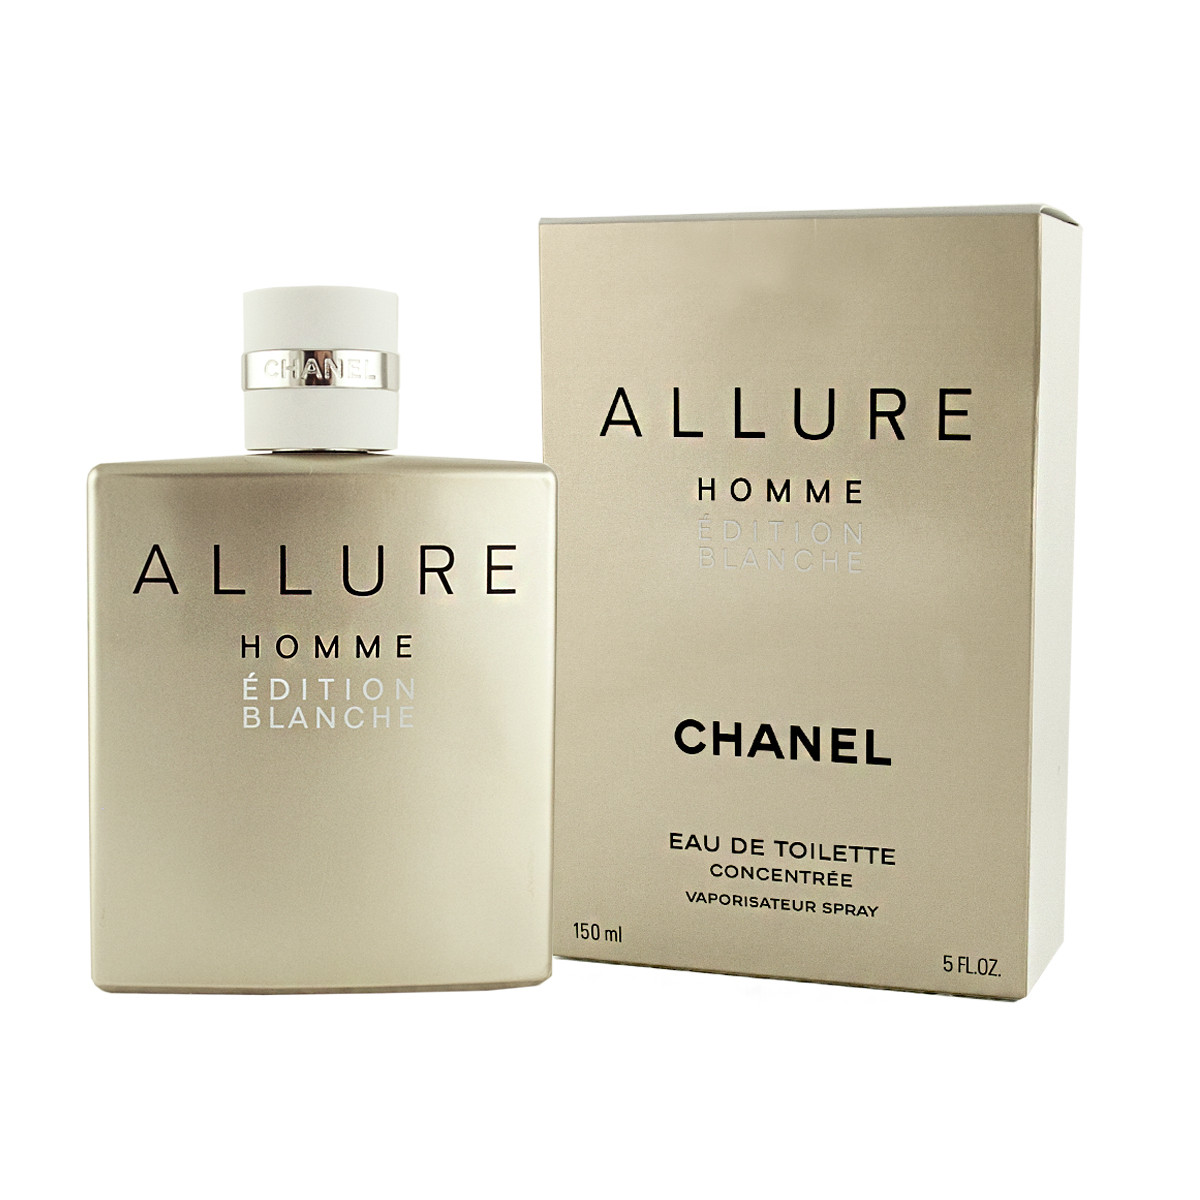 Туалетная вода chanel homme. Chanel Allure homme Edition Blanche. Парфюм Allure homme Edition Blanche Chanel. Chanel мужские. Allure homme Edition Blanche. Chanel Allure Blanche.